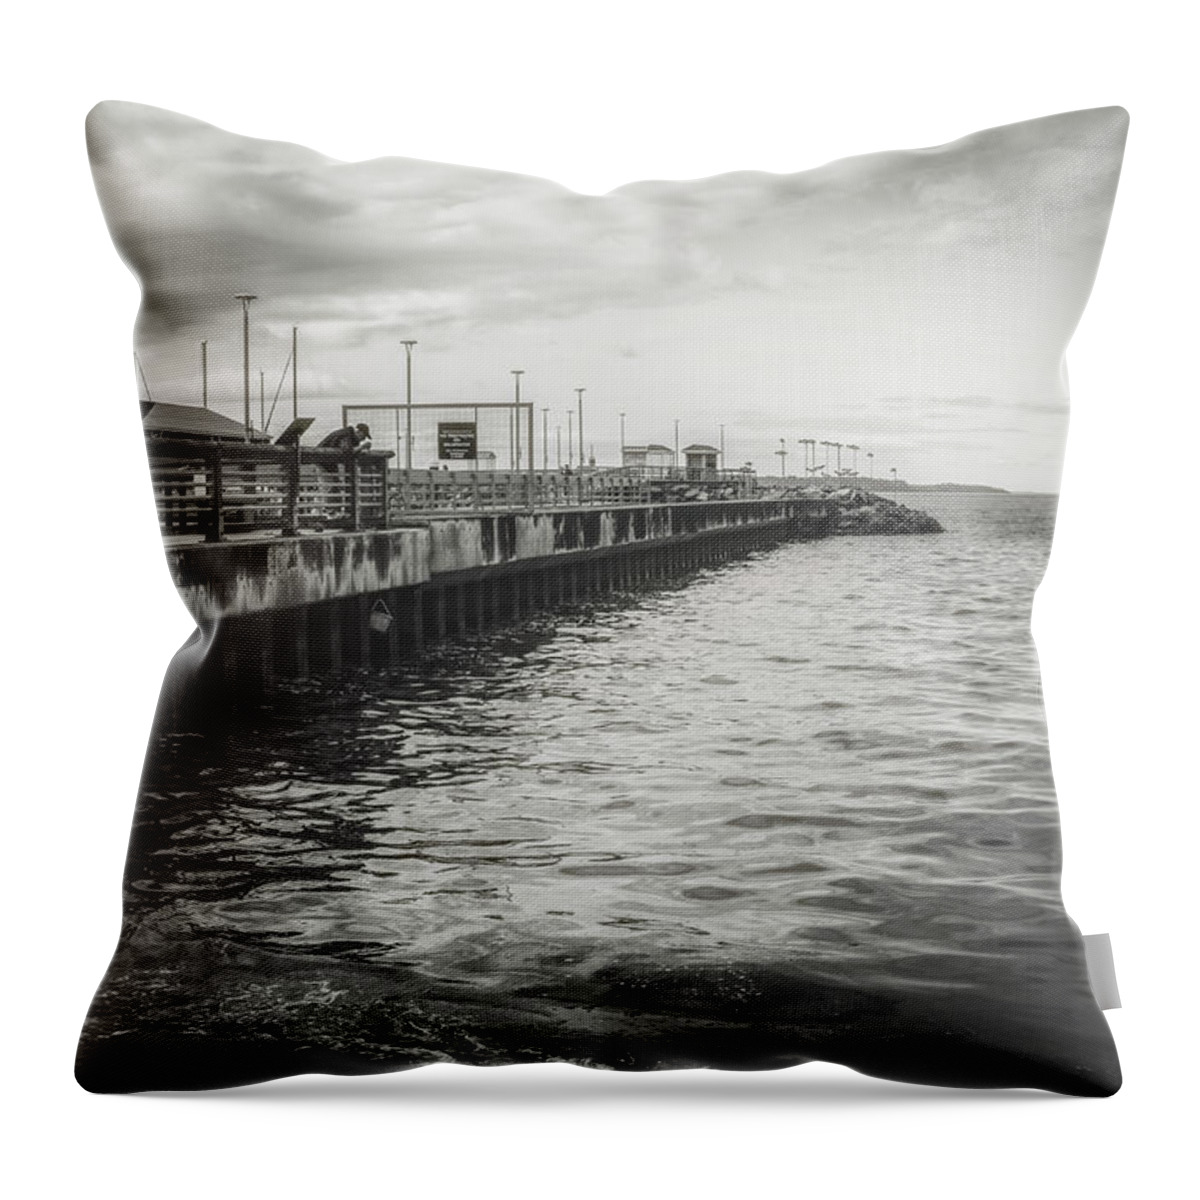 Sea Throw Pillow featuring the photograph Morning Fog by Anamar Pictures